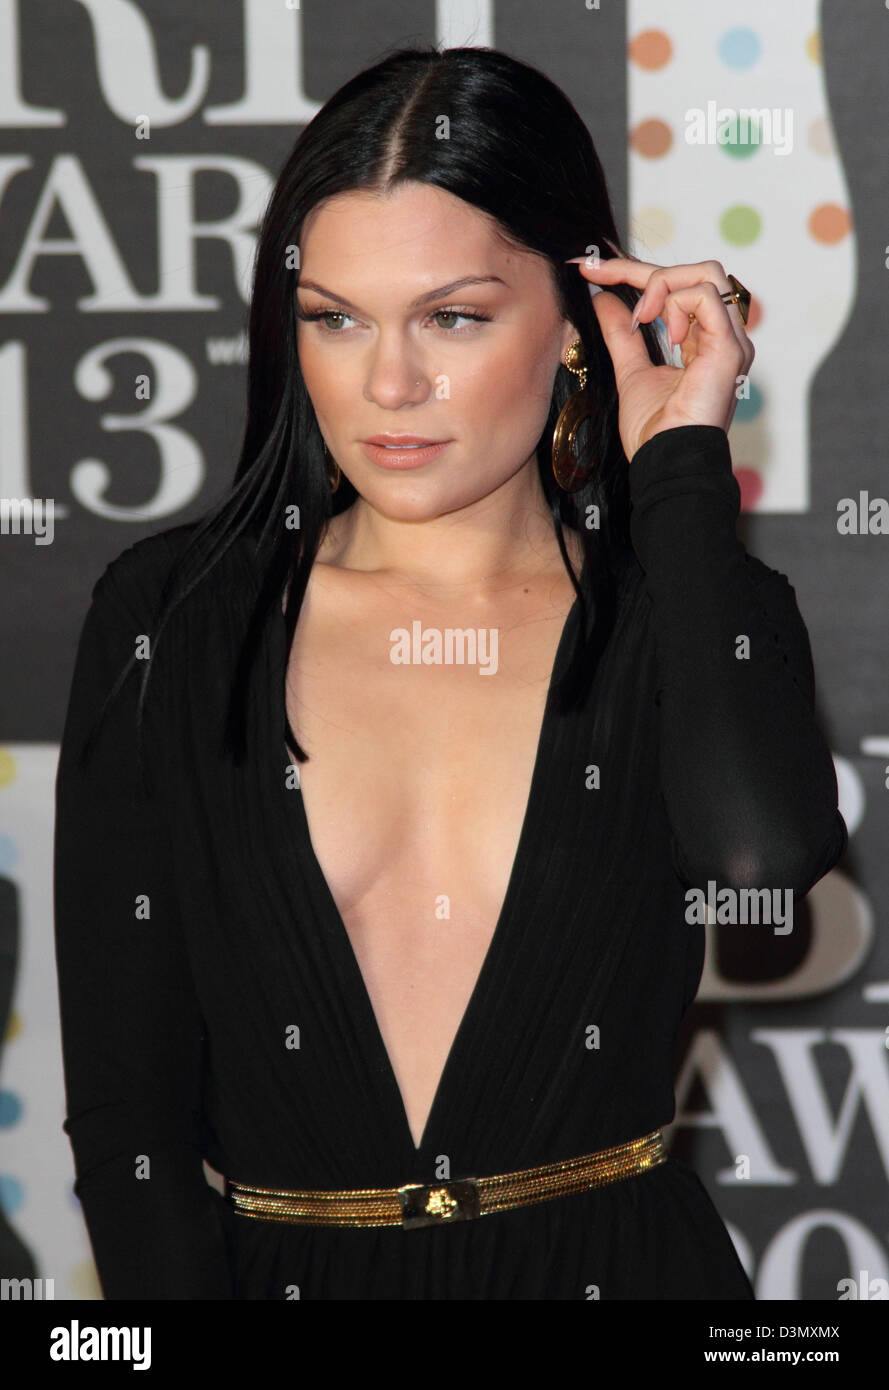 London, UK. 20th February 2013. Jessie J at the The 2013 Brit Awards at the O2 Arena, London - February 20th 2013  Photo by Keith Mayhew/ Alamy Live News Stock Photo